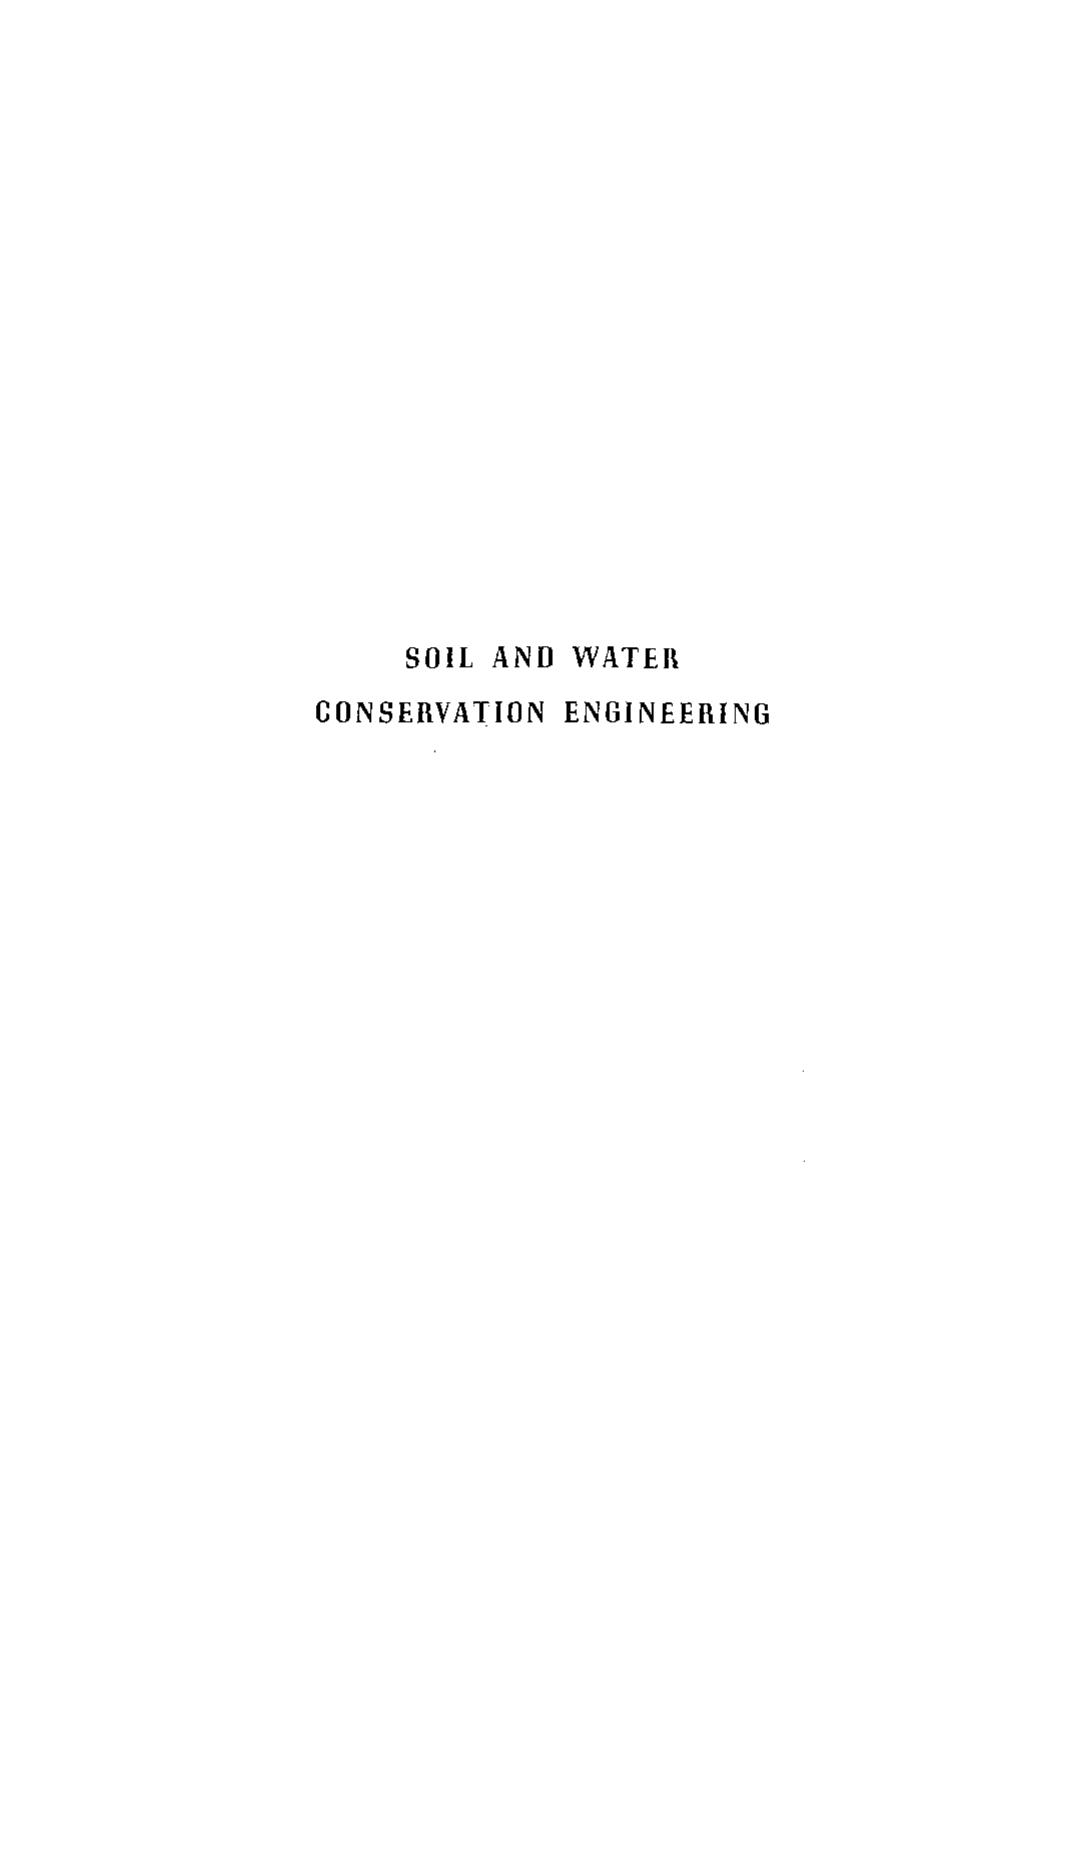 soil and water conservation engineering   1955